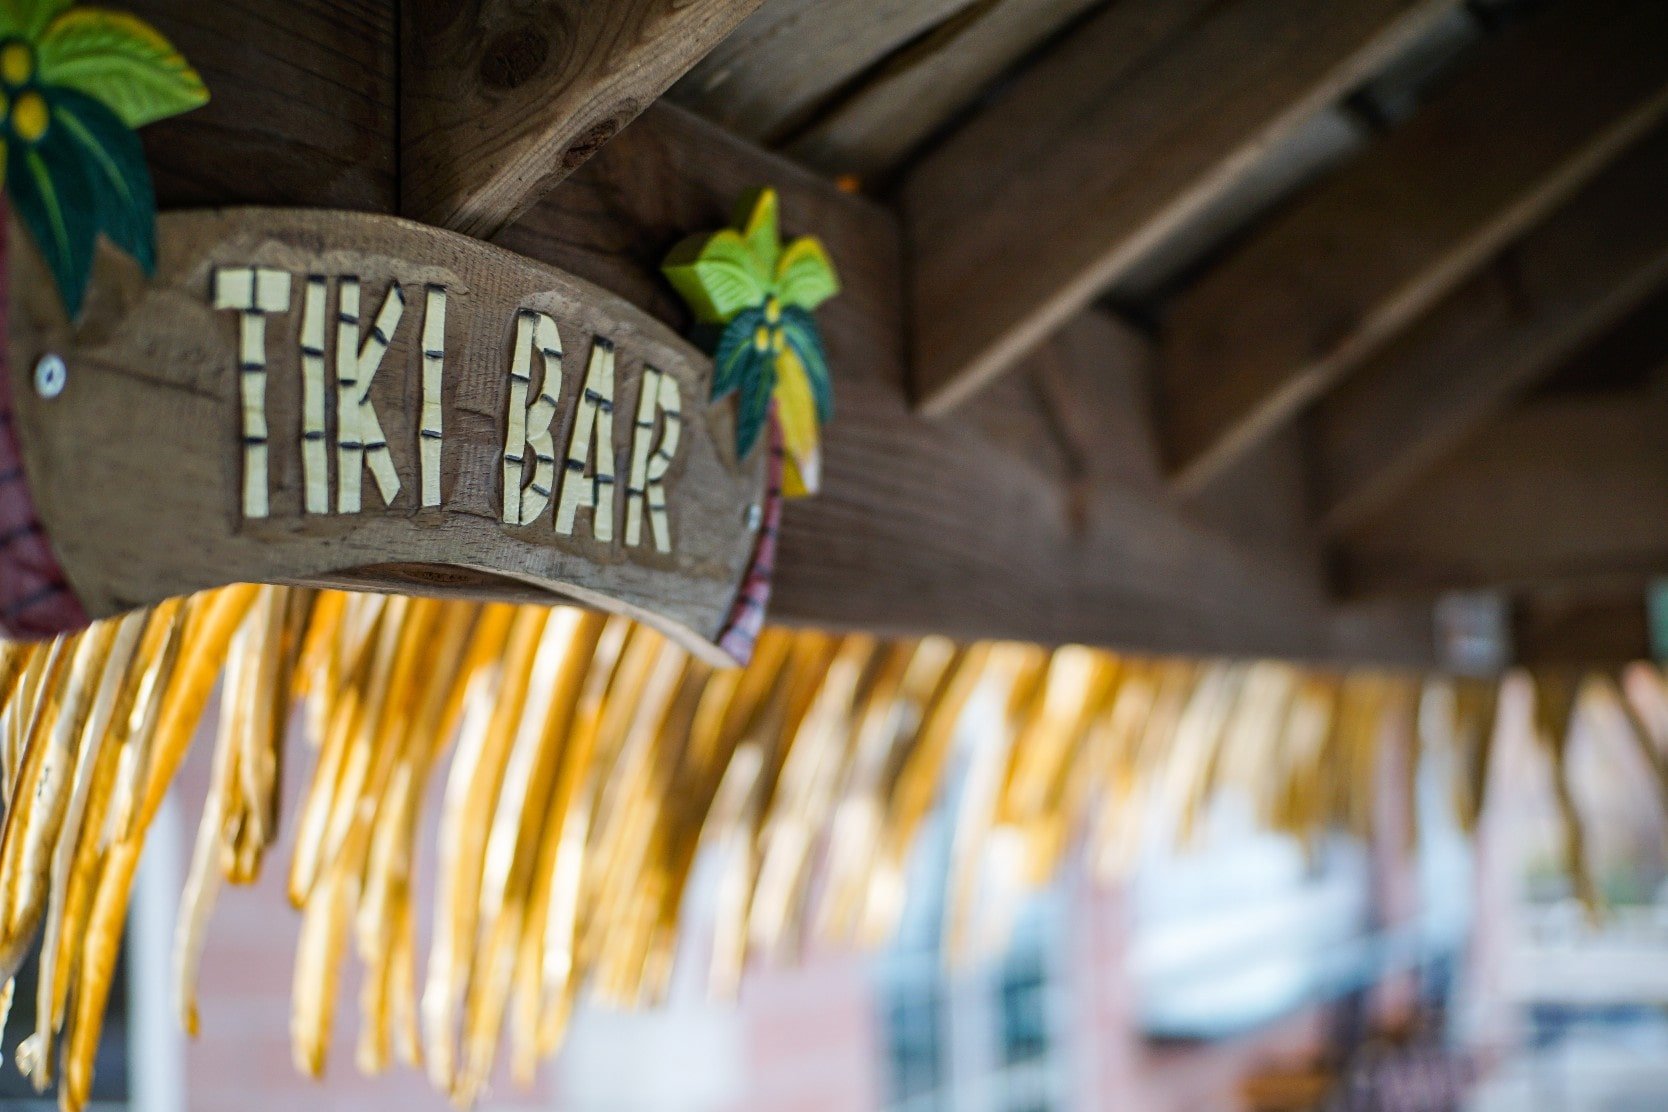 Tiki bar sign under thatched roof in Venice, Florida